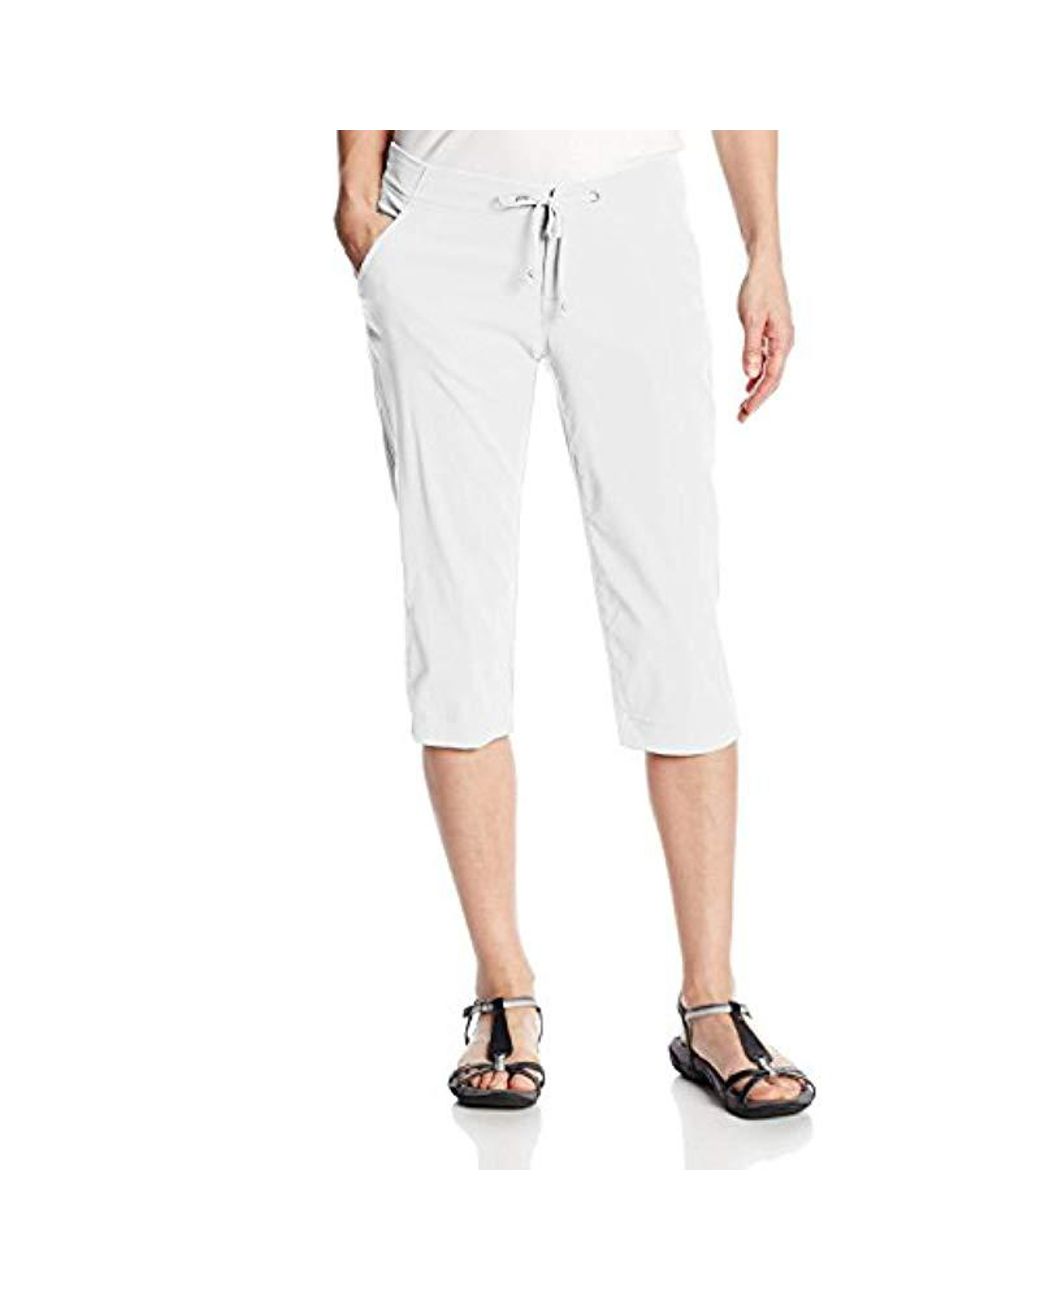 Columbia Anytime Outdoor Capri Pant in White